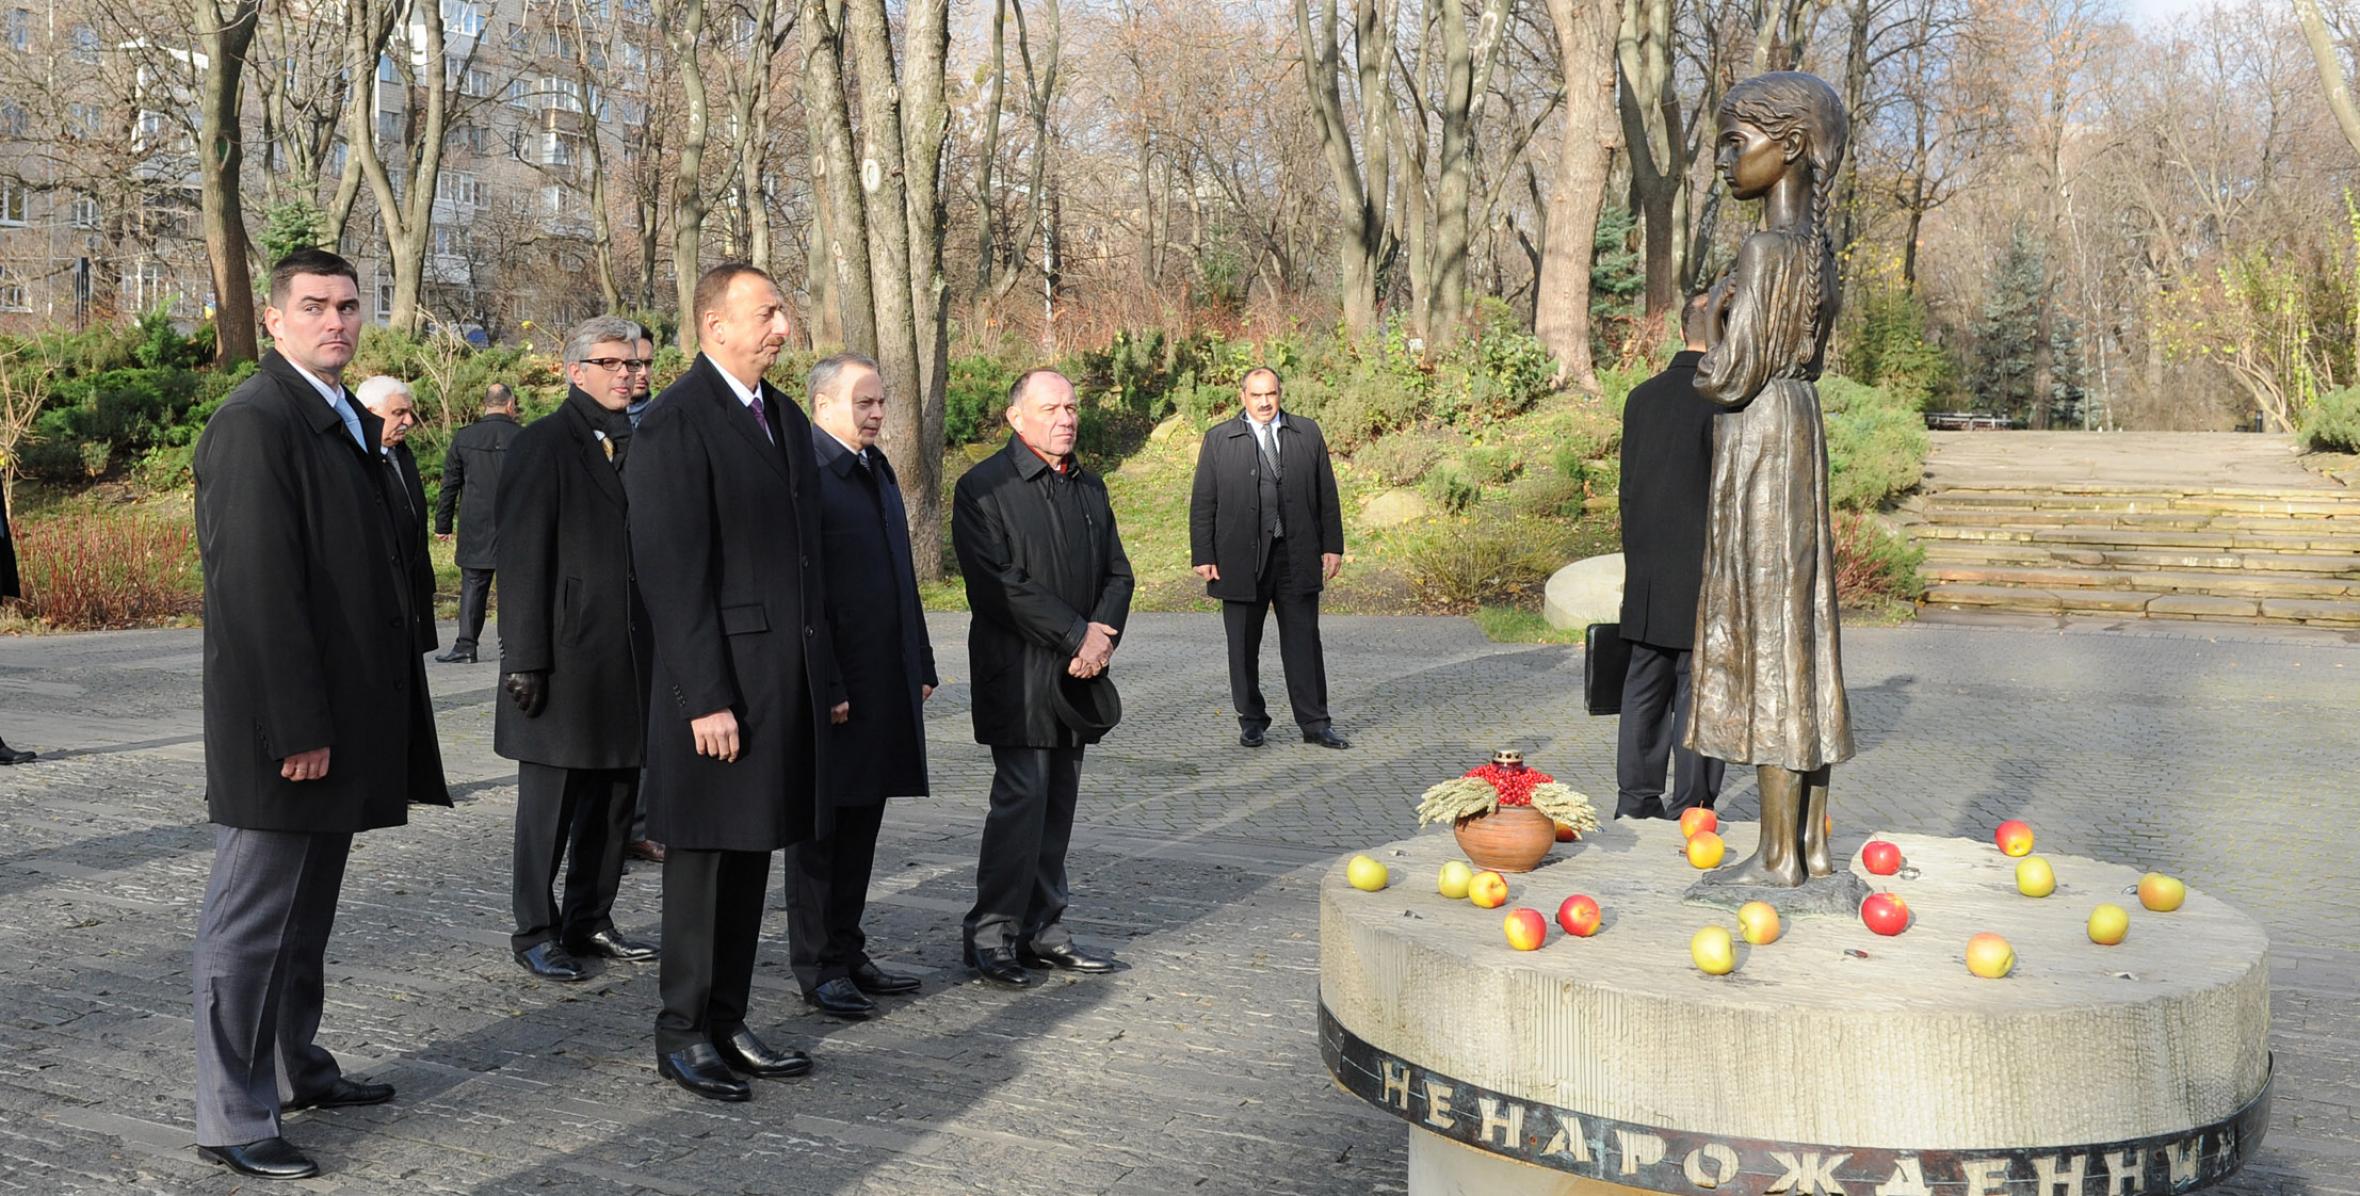 Ilham Aliyev has visited the monument erected in memory of Holodomor victims